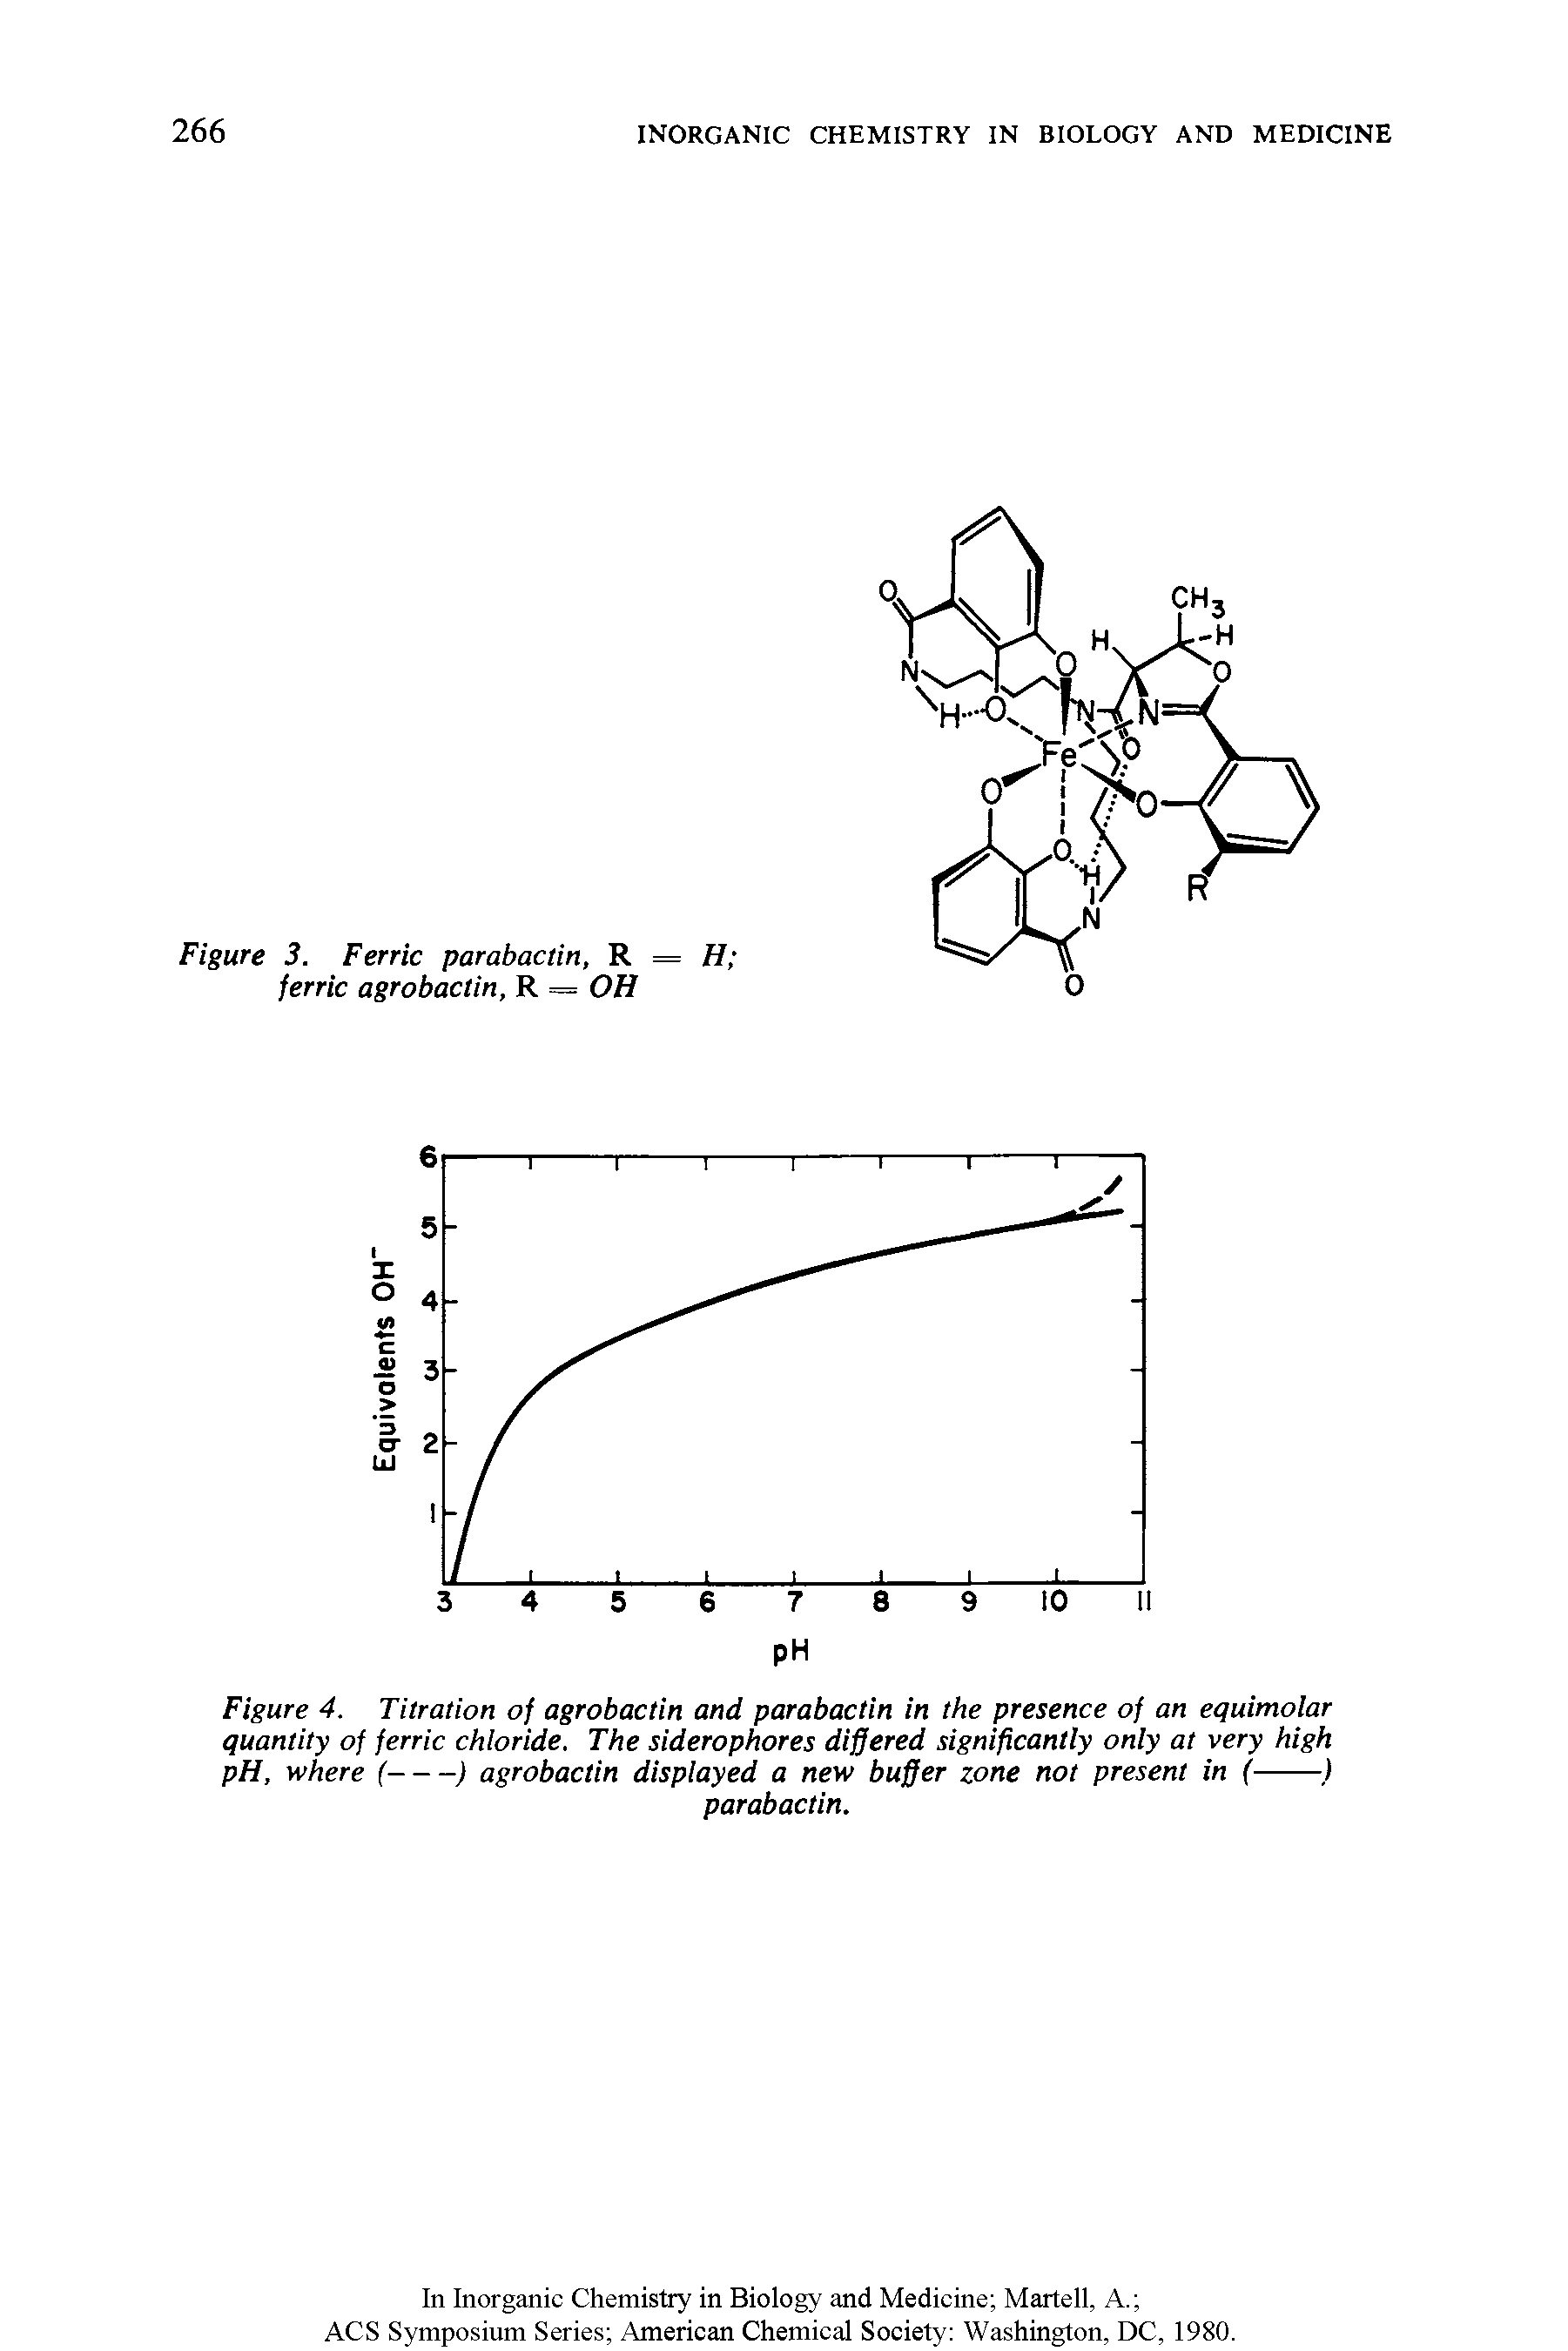 Figure 4. Titration of agrobactin and parabactin in the presence of an equimolar quantity of ferric chloride. The siderophores differed significantly only at very high...